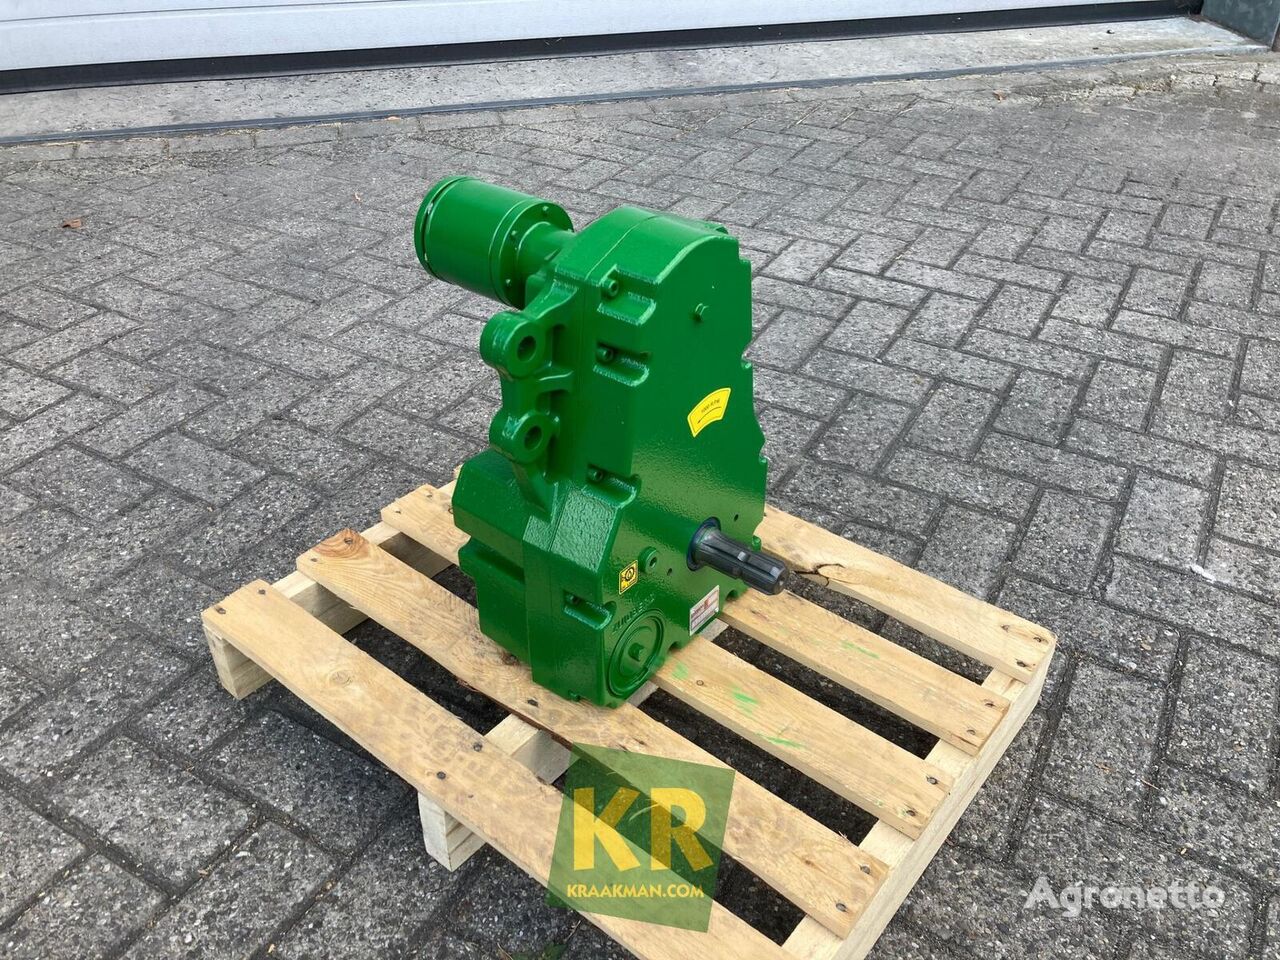 Zuidberg PX 4 FRONT PTO for wheel tractor